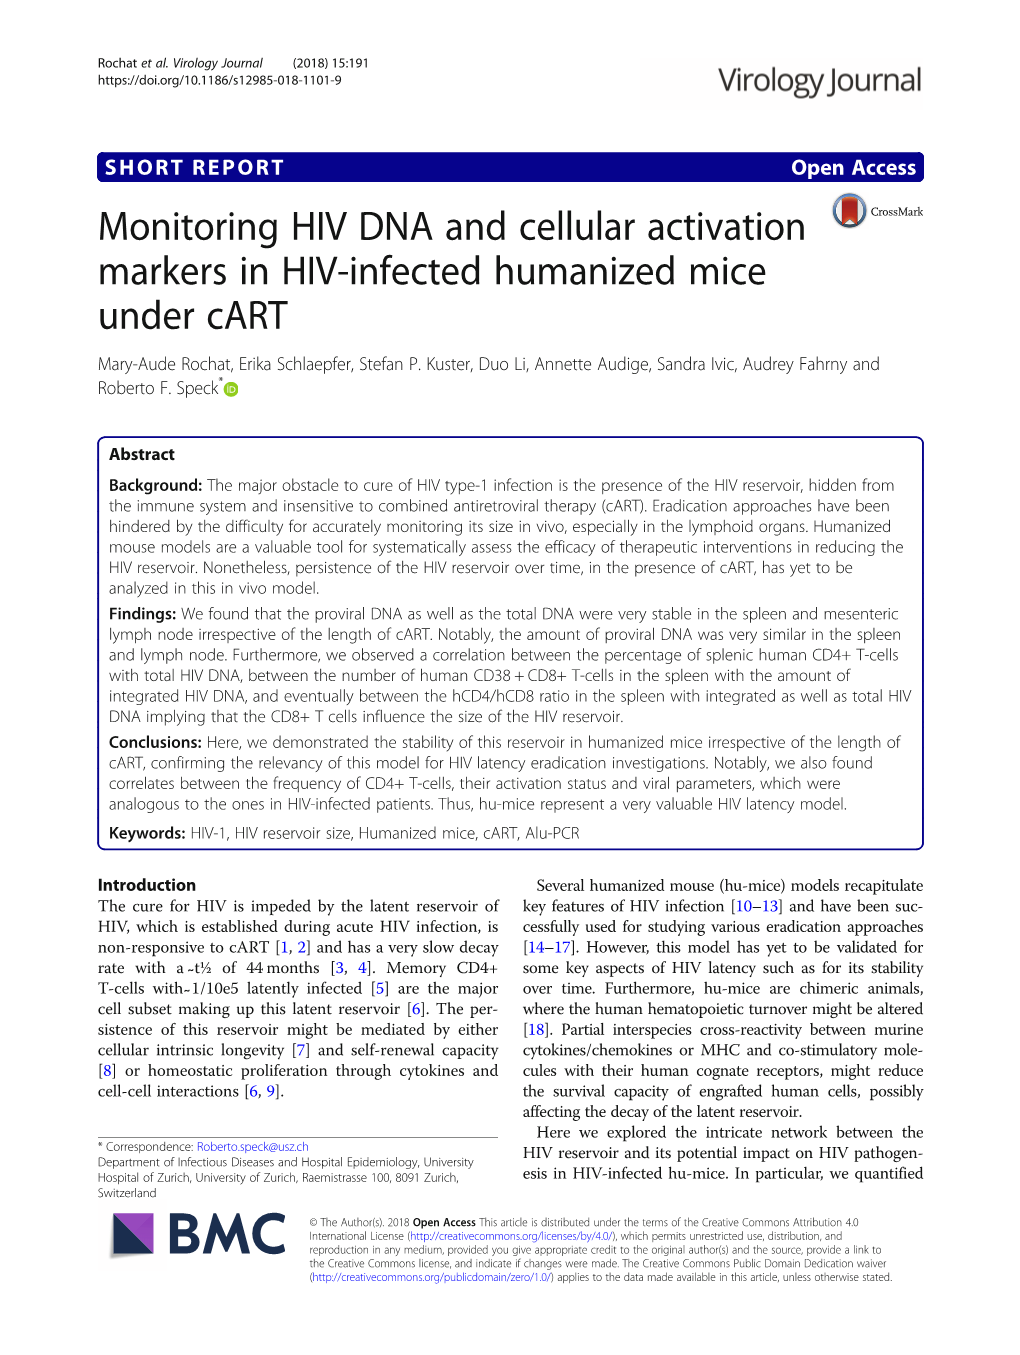 Monitoring HIV DNA and Cellular Activation Markers in HIV-Infected Humanized Mice Under Cart Mary-Aude Rochat, Erika Schlaepfer, Stefan P